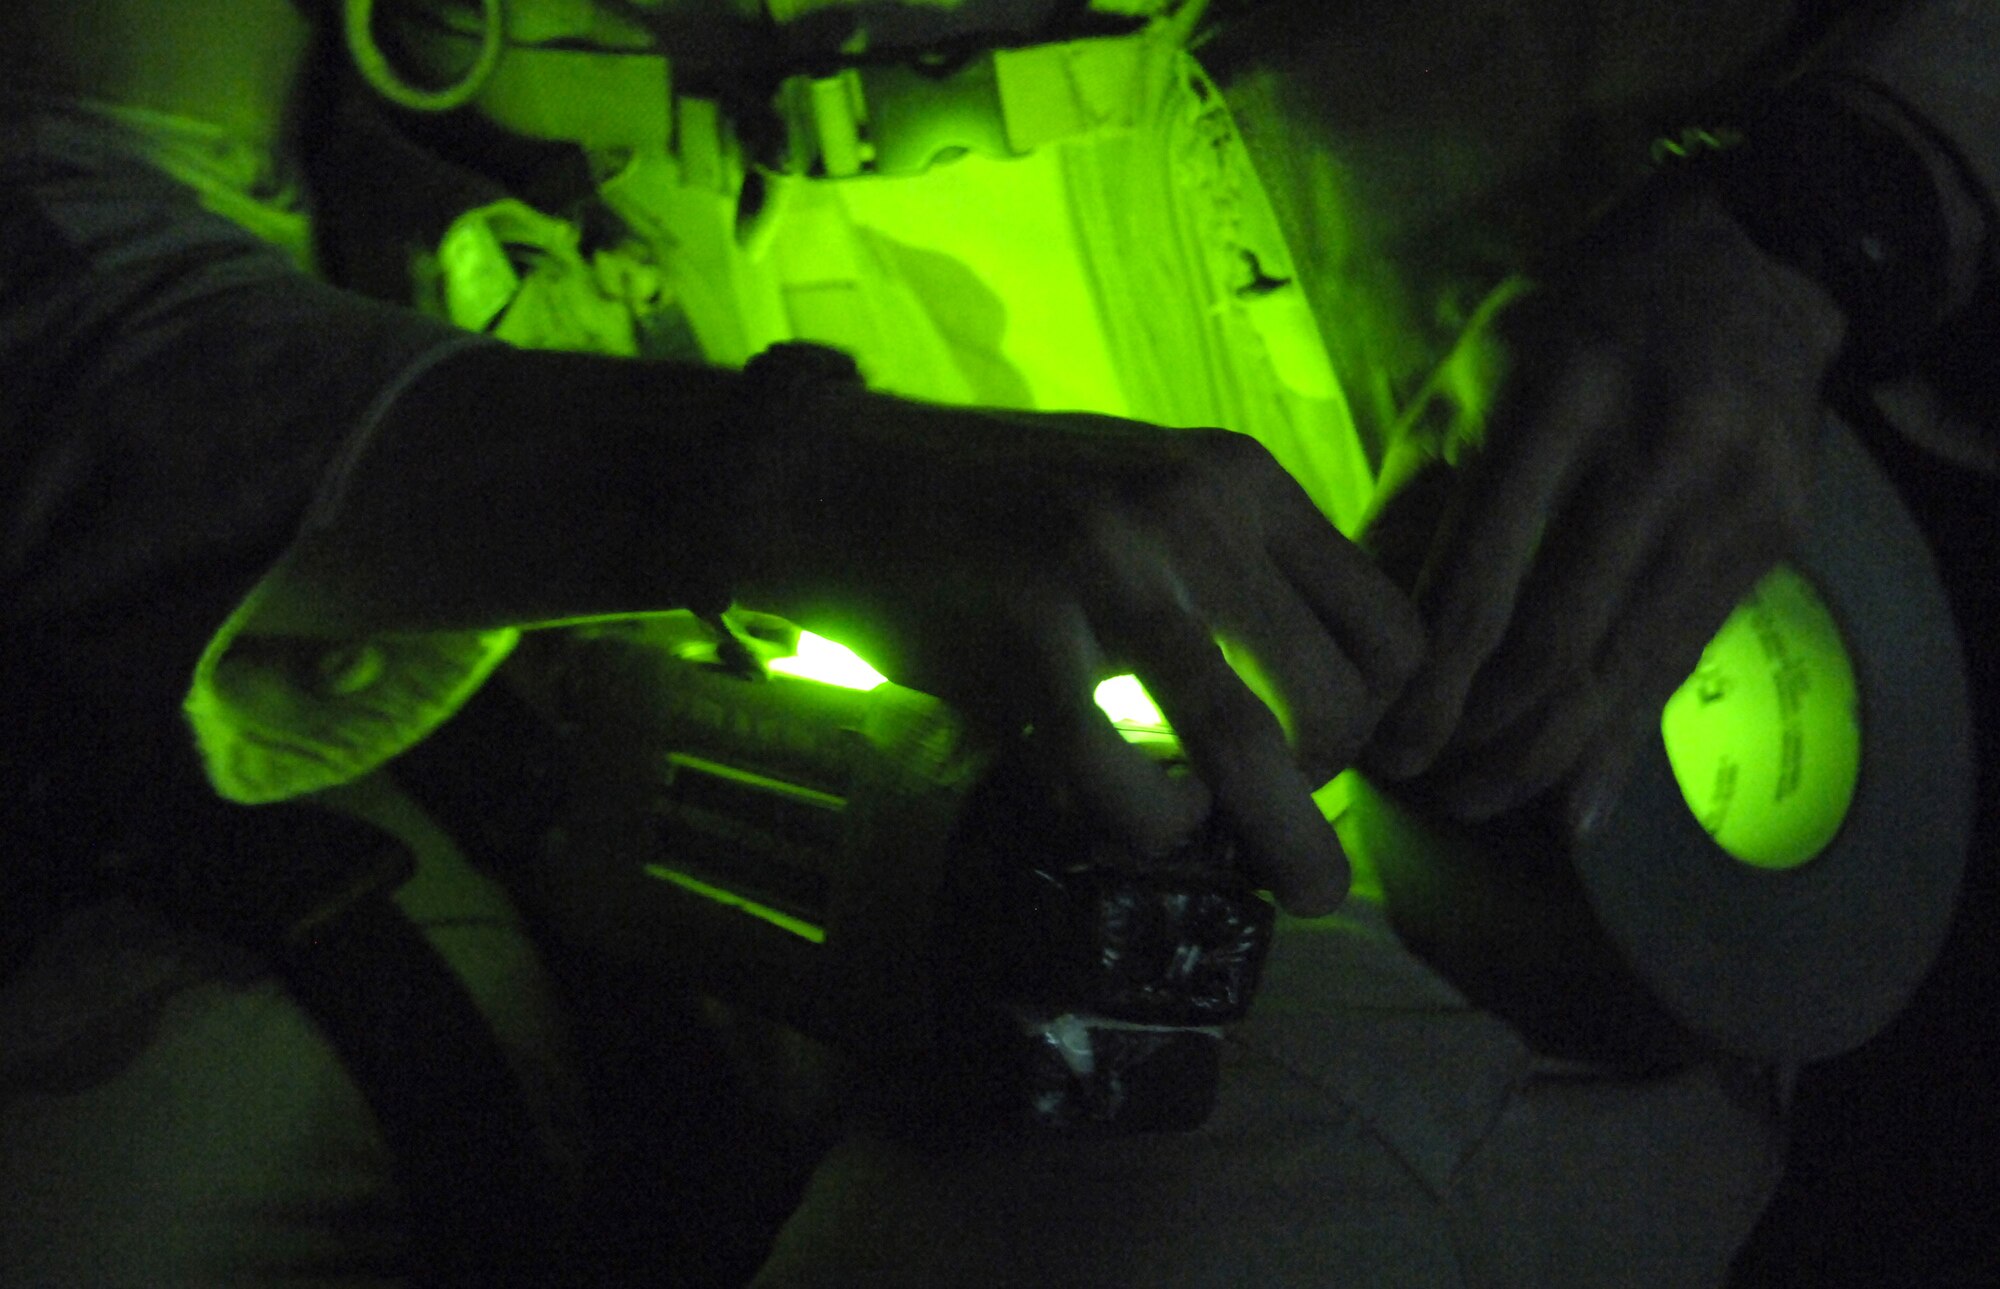 Senior Airman Scott White tapes a chemlight to a package of C-4 explosives before sending a Talon robot to inspect a possible improvised explosive device, or IED, at a location southwest of Baghdad, Iraq, on Wednesday, June 28. The C-4 is used to detonate the IED. Airman White and two other explosive ordnance technicians were called to the scene to clear the area. He is with the 447th Expeditionary Civil Engineer Squadron, and is deployed from Nellis Air Force Base, Nev. (U.S. Air Force photo/Senior Airman Brian Ferguson) 